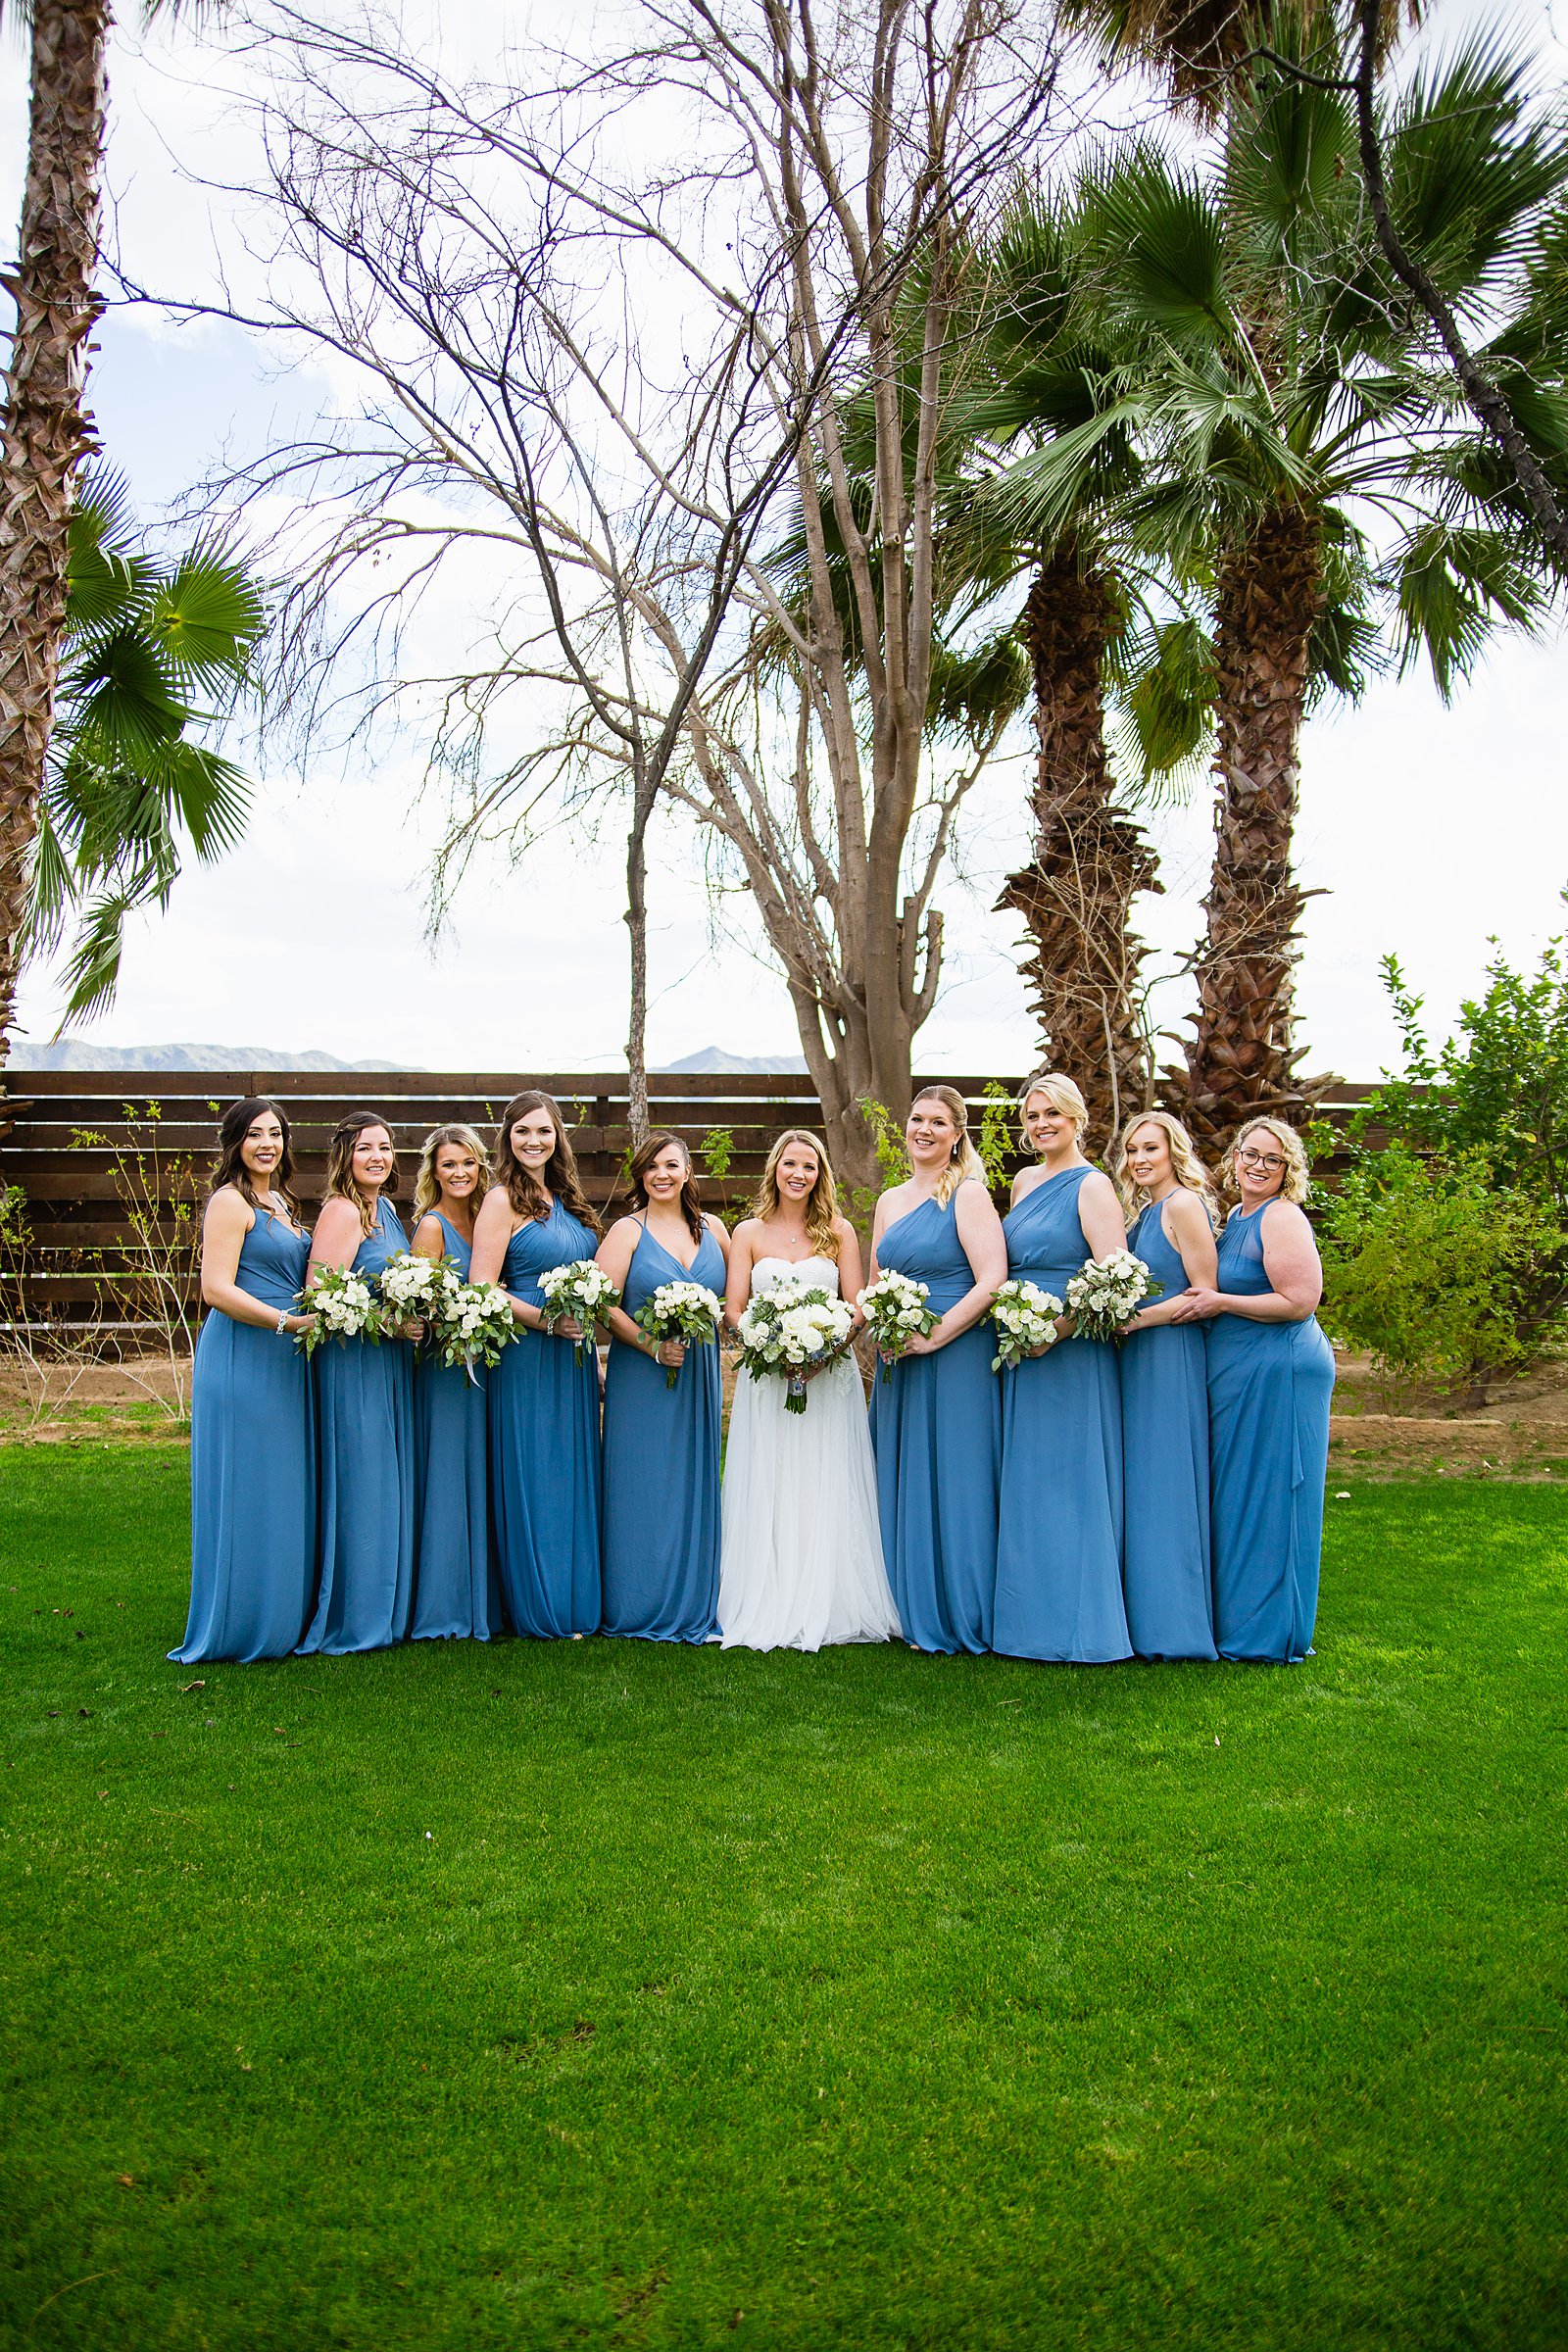 Bride and bridesmaids together at a Venue At The Grove wedding by Arizona wedding photographer PMA Photography.